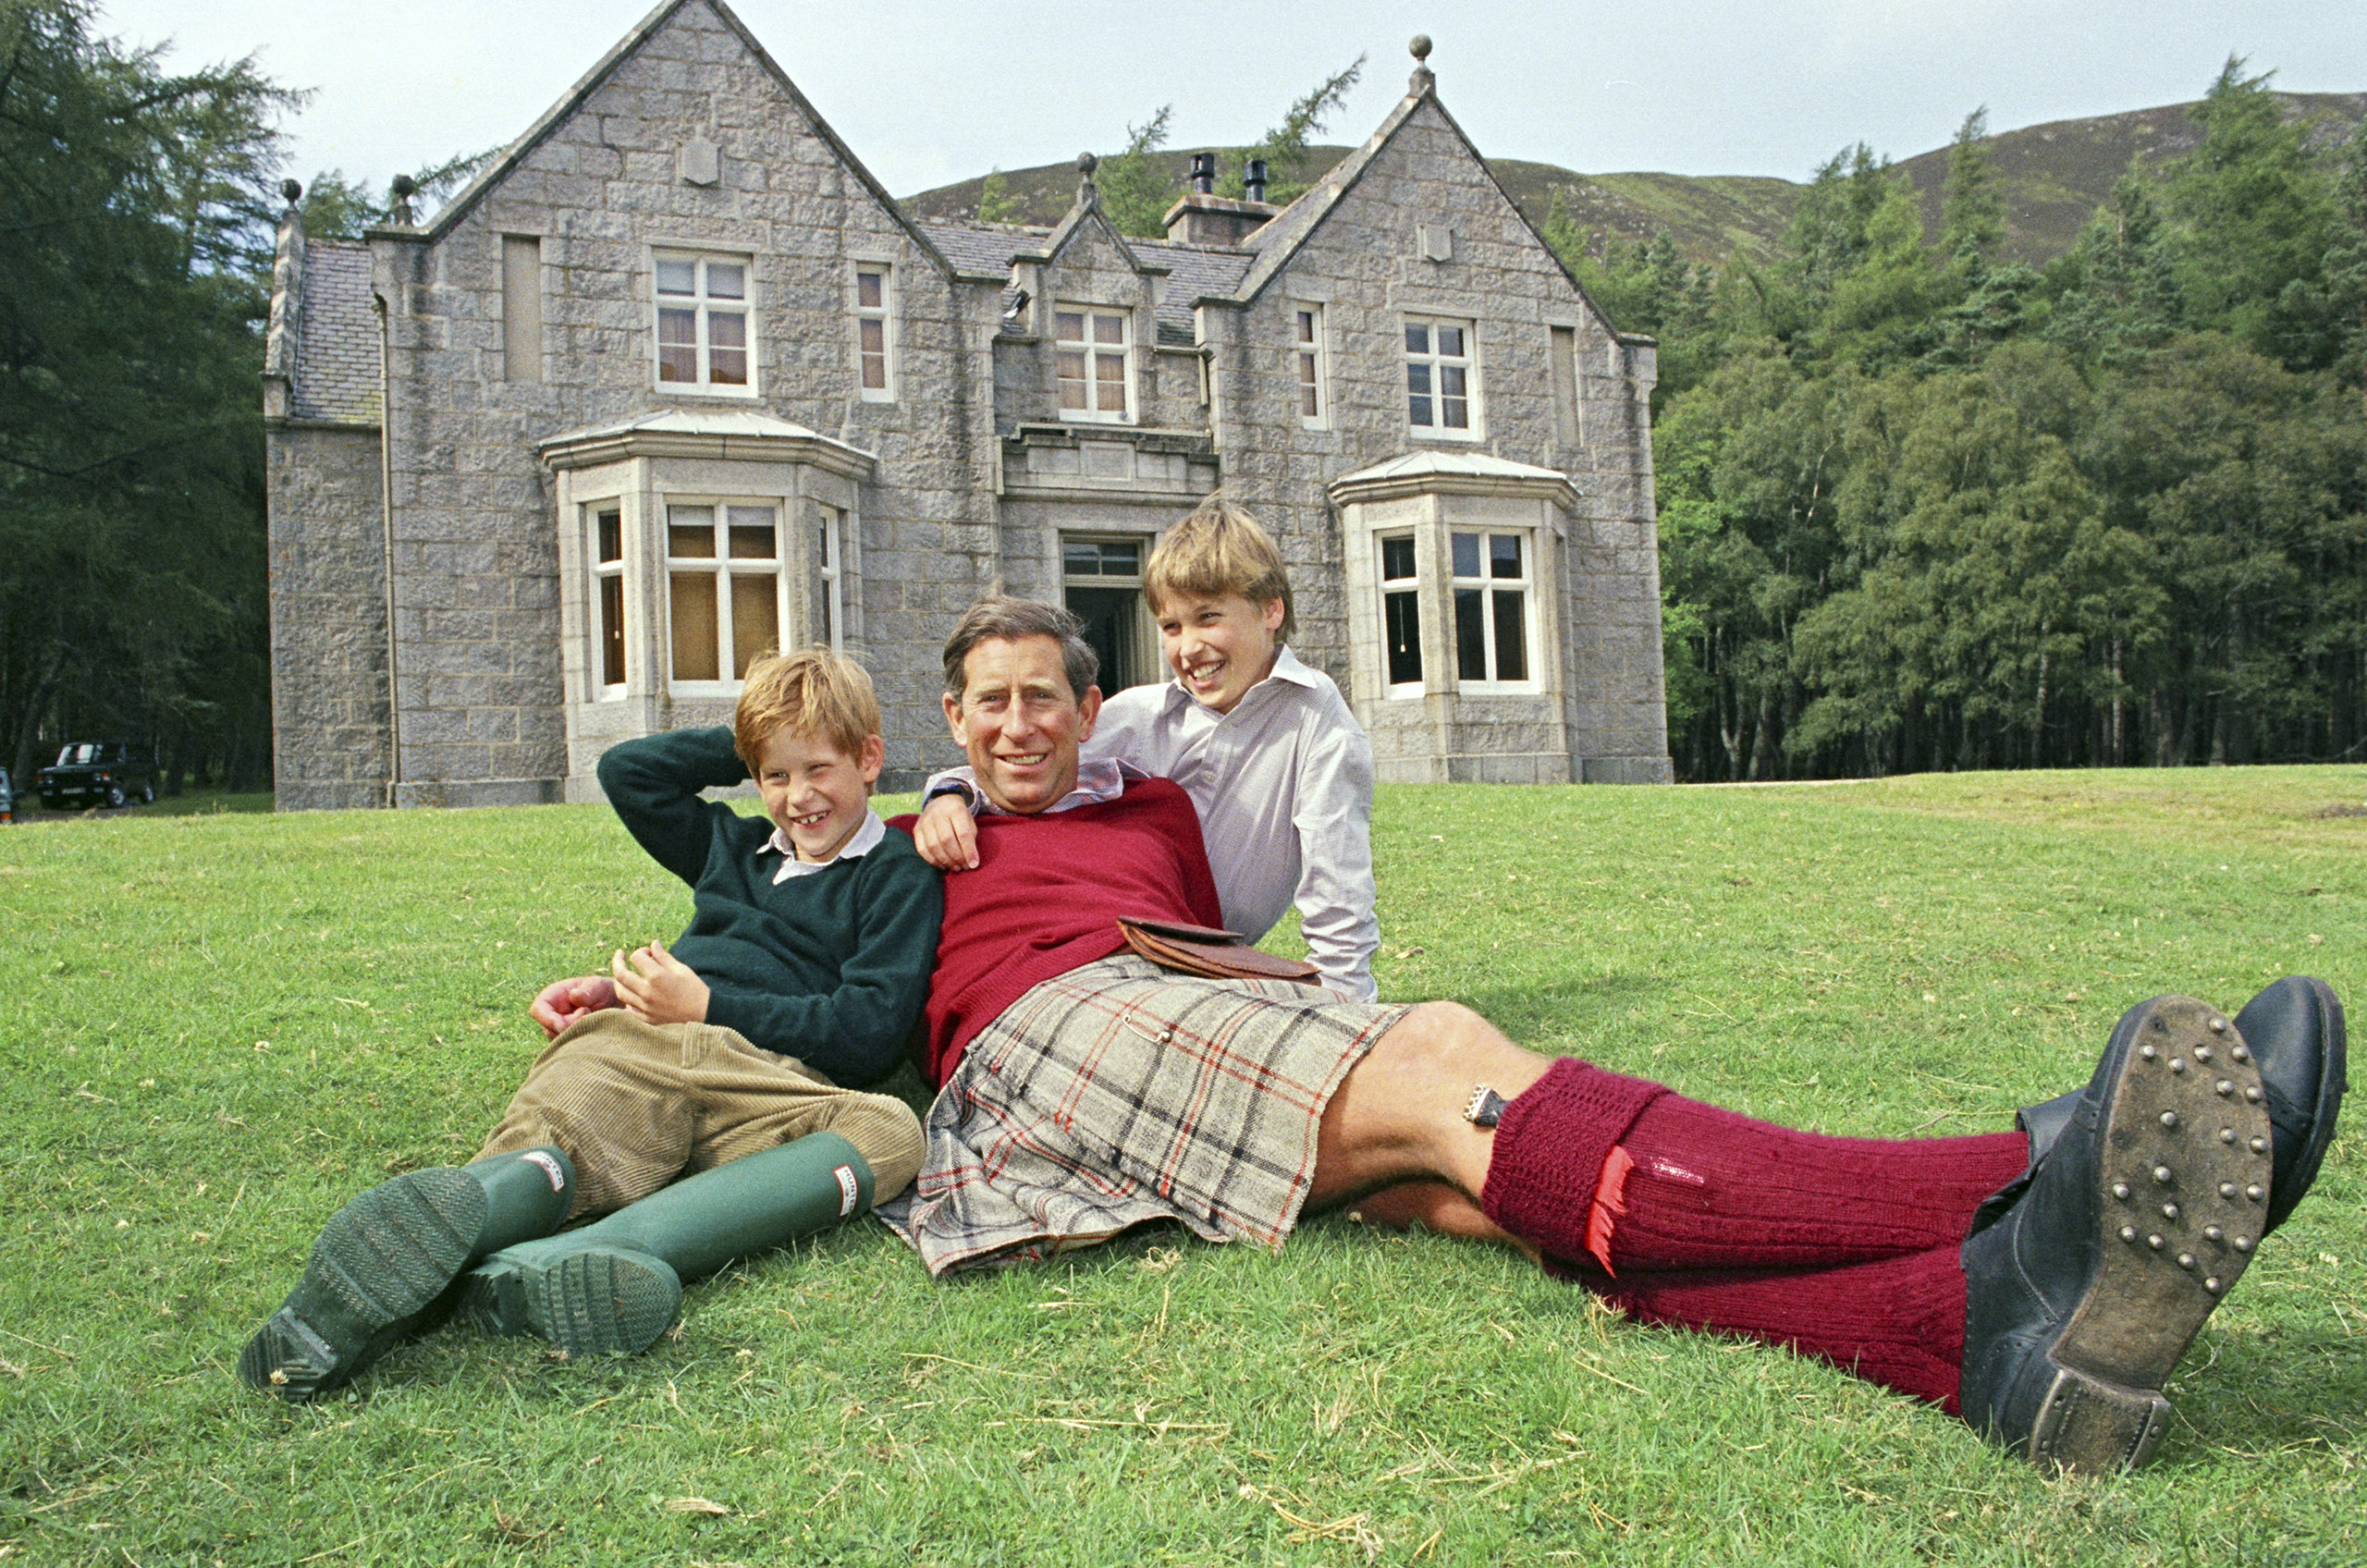 Charles and his sons relax on the lawn of Glas-allt Shiel, a royal lodge by the shores of a lake on the Balmoral estate in Scotland, in 1993. (Lesley Donald—Sygma/Corbis)